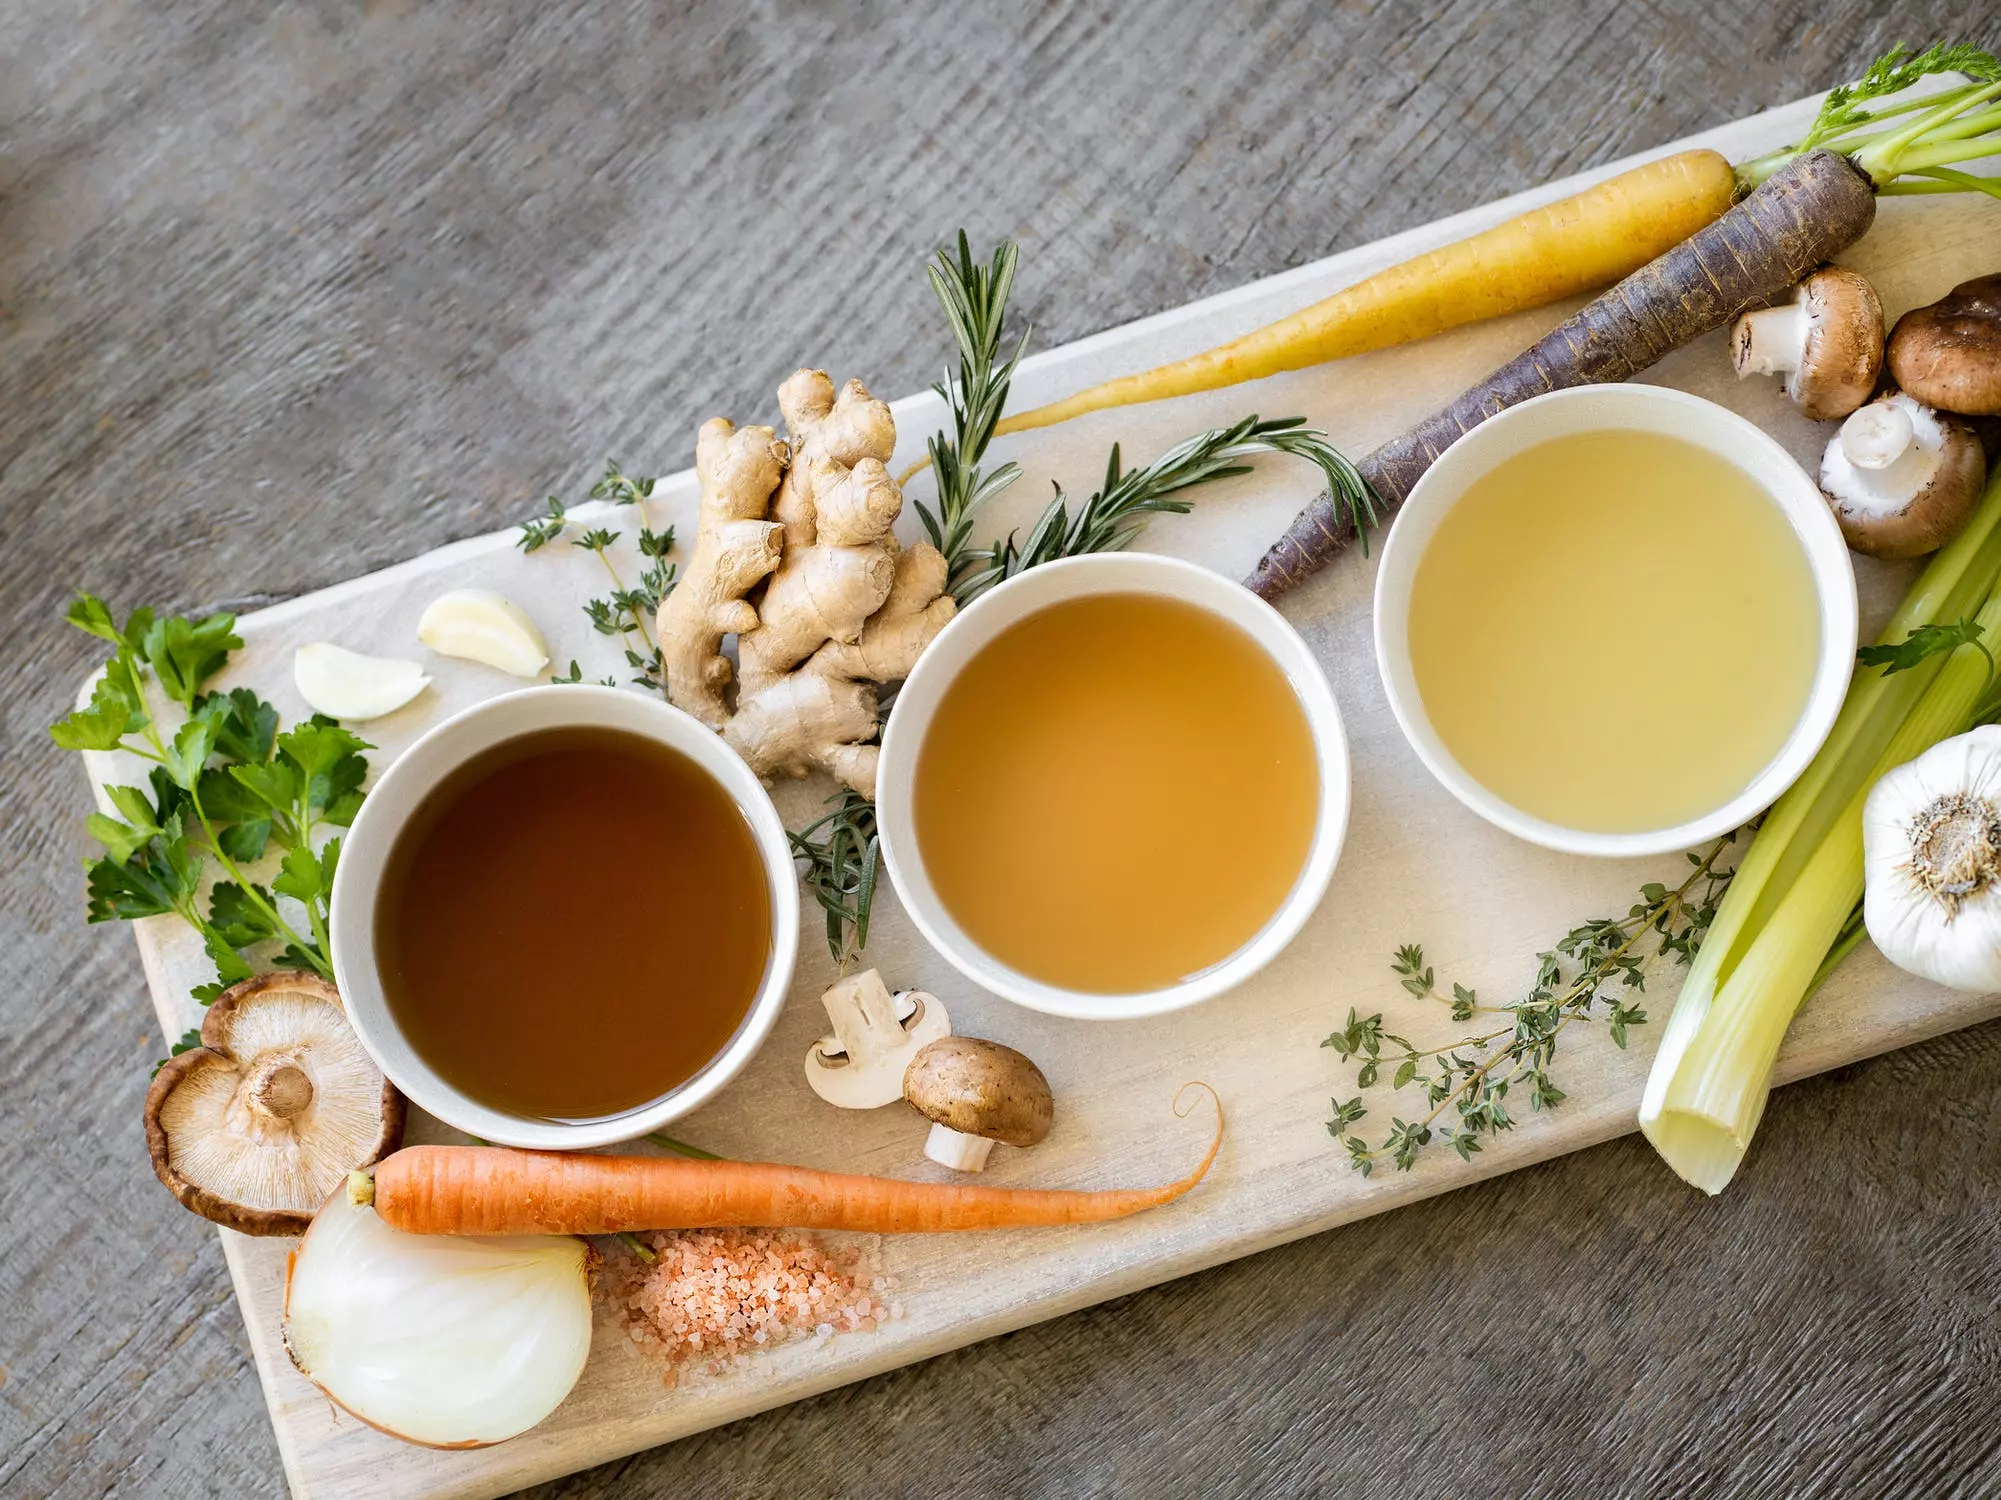 Taking stock of bone broth: Is it really worth the hype?